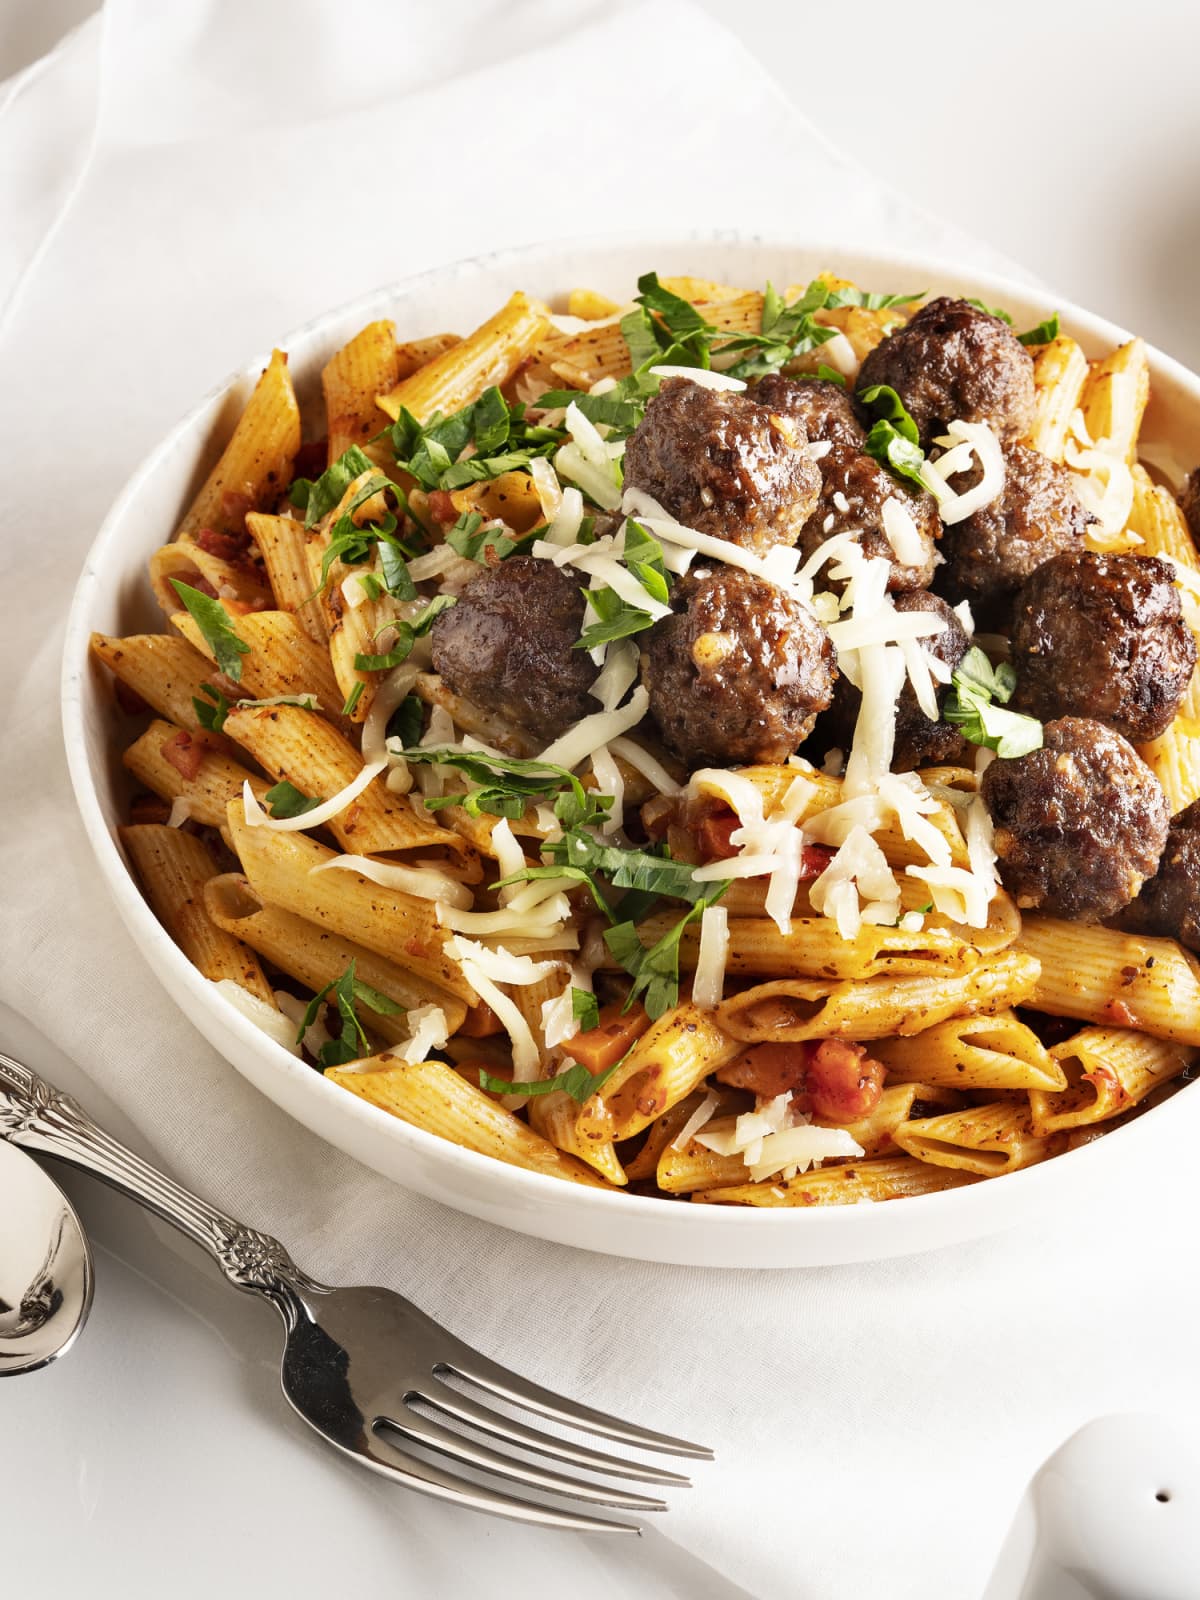 Small meatballs mixed with pasta, cheese, and herbs in a bowl